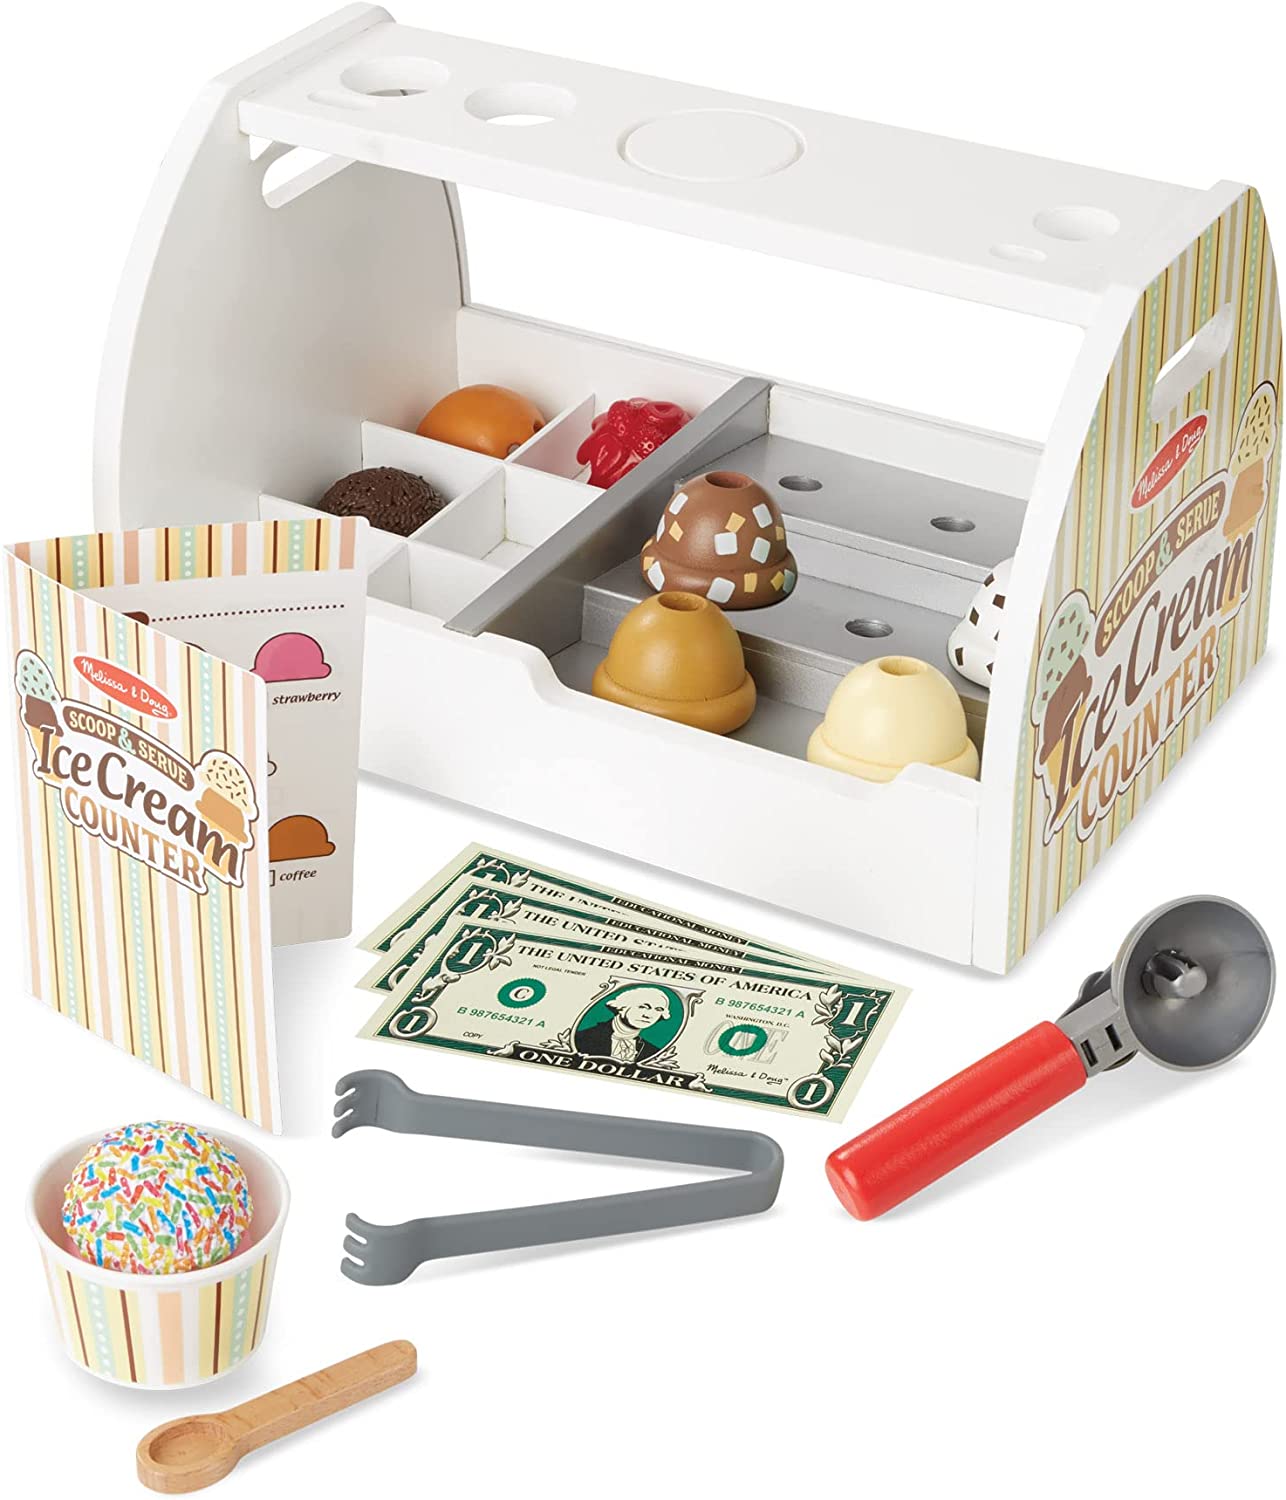 28-Piece Melissa & Doug Wooden Scoop and Serve Ice Cream Counter $22.39 + Free Shipping w/ Amazon Prime or $25+